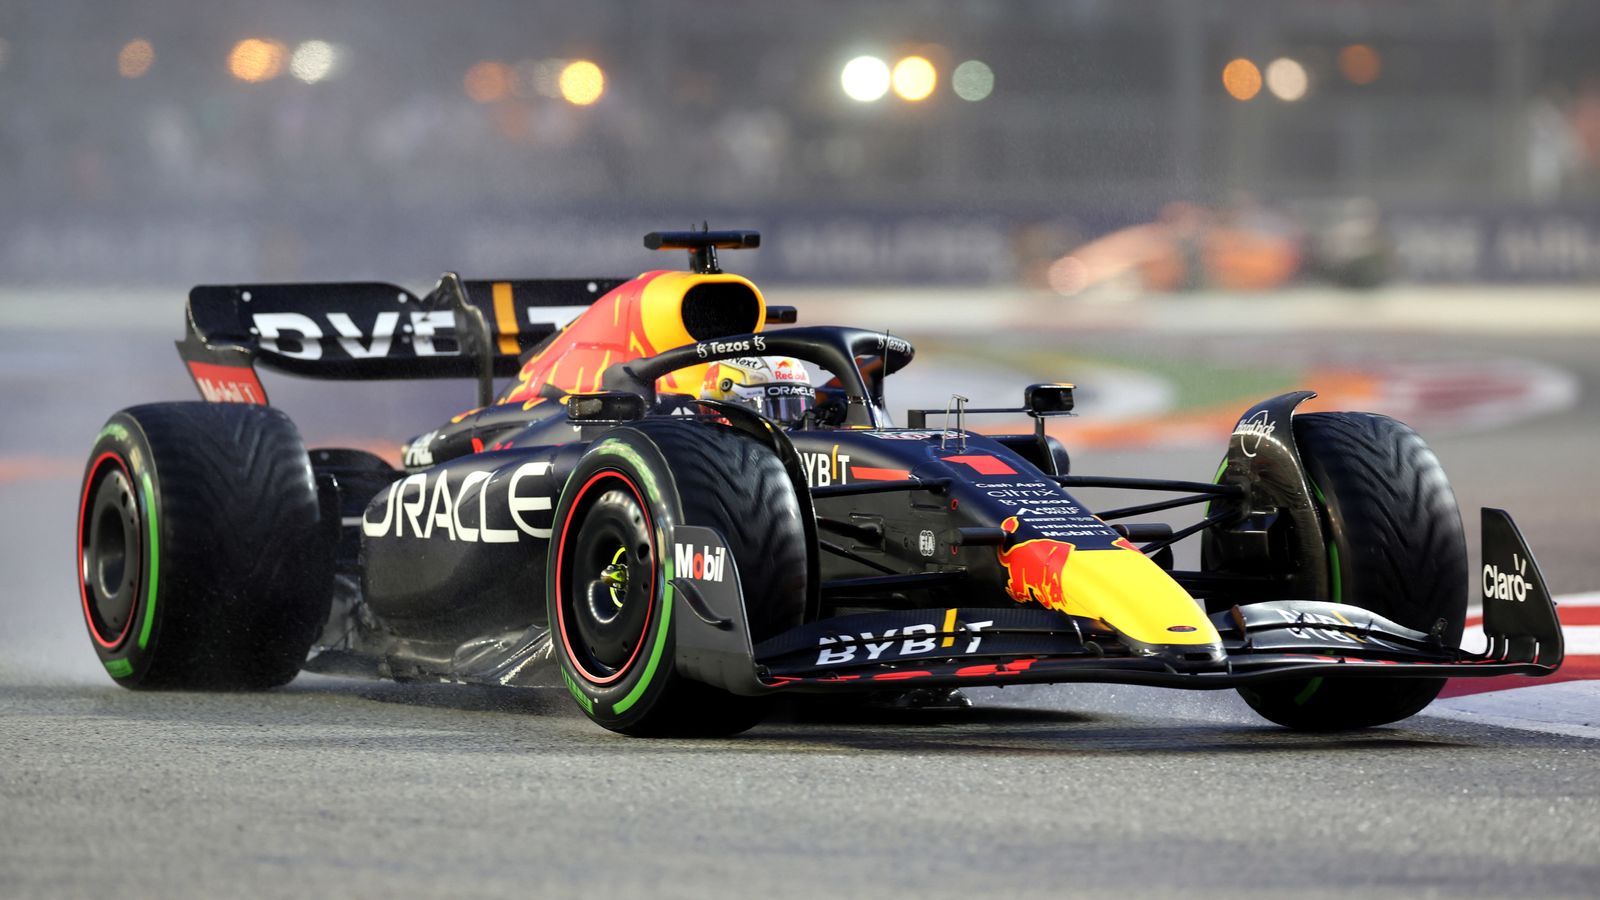 Singapore Grand Prix Final Practice and Qualifying as Max Verstappen closes on drivers' title